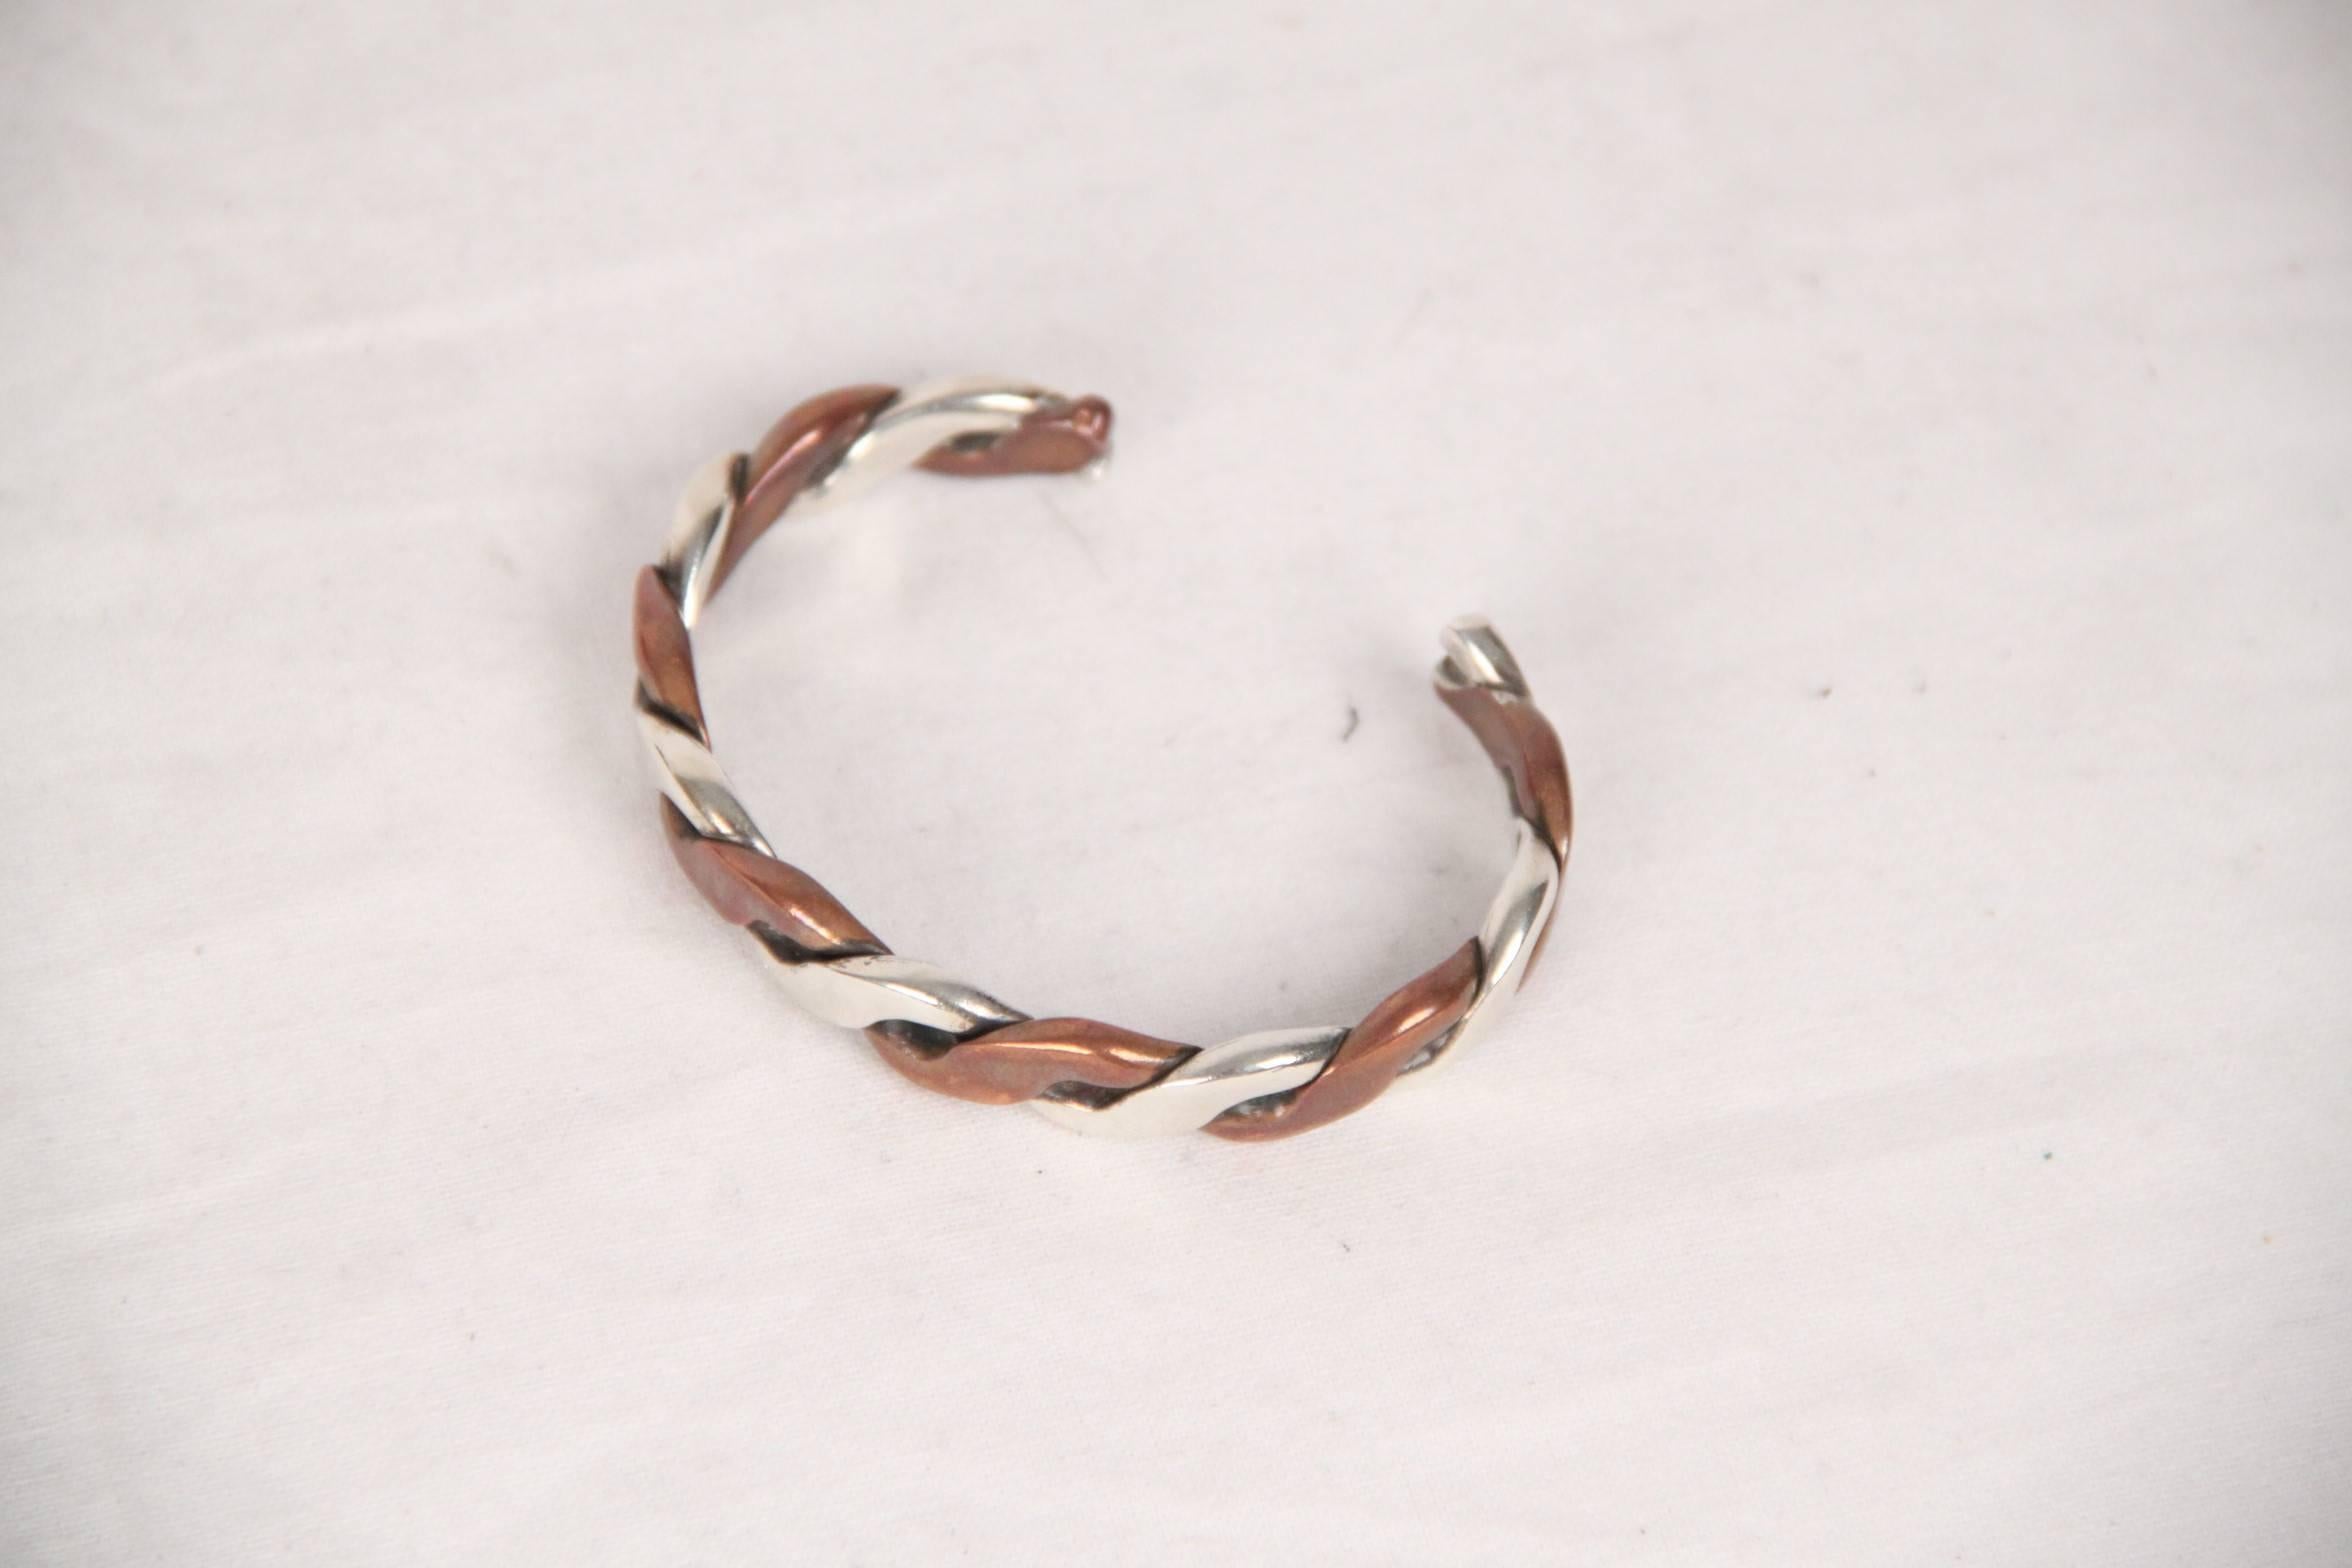 Vintage GUCCI bracelet from the 1970s. Bangle design, it is crafted in copper and sterling silver. 

Logos / Tags: 'GUCCI Boutique' engraved inside the bracelet. The bracelet is marked '925' and other silver mark internally